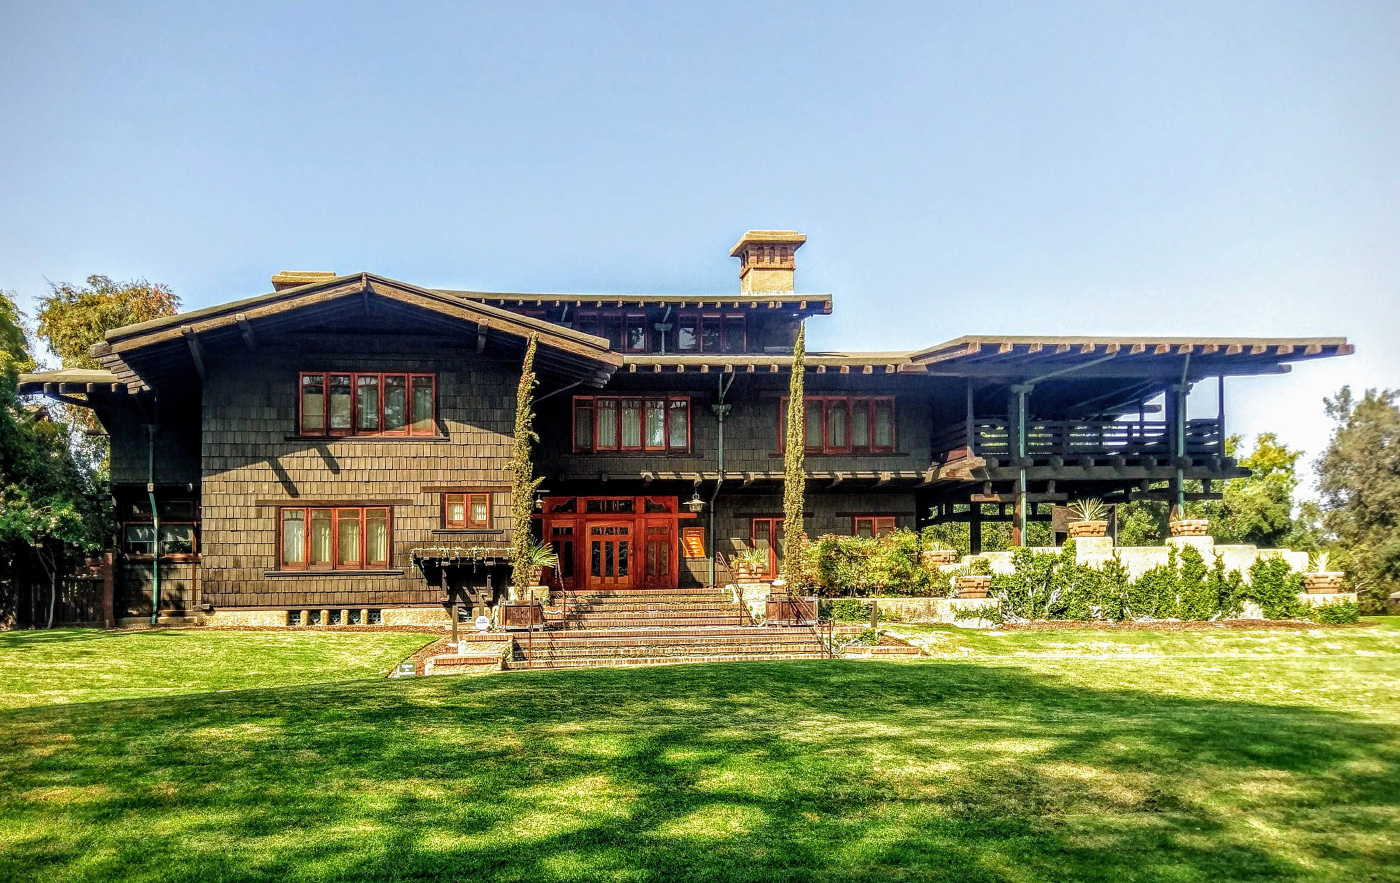 Photo of a Craftsman style home, the Gamble House